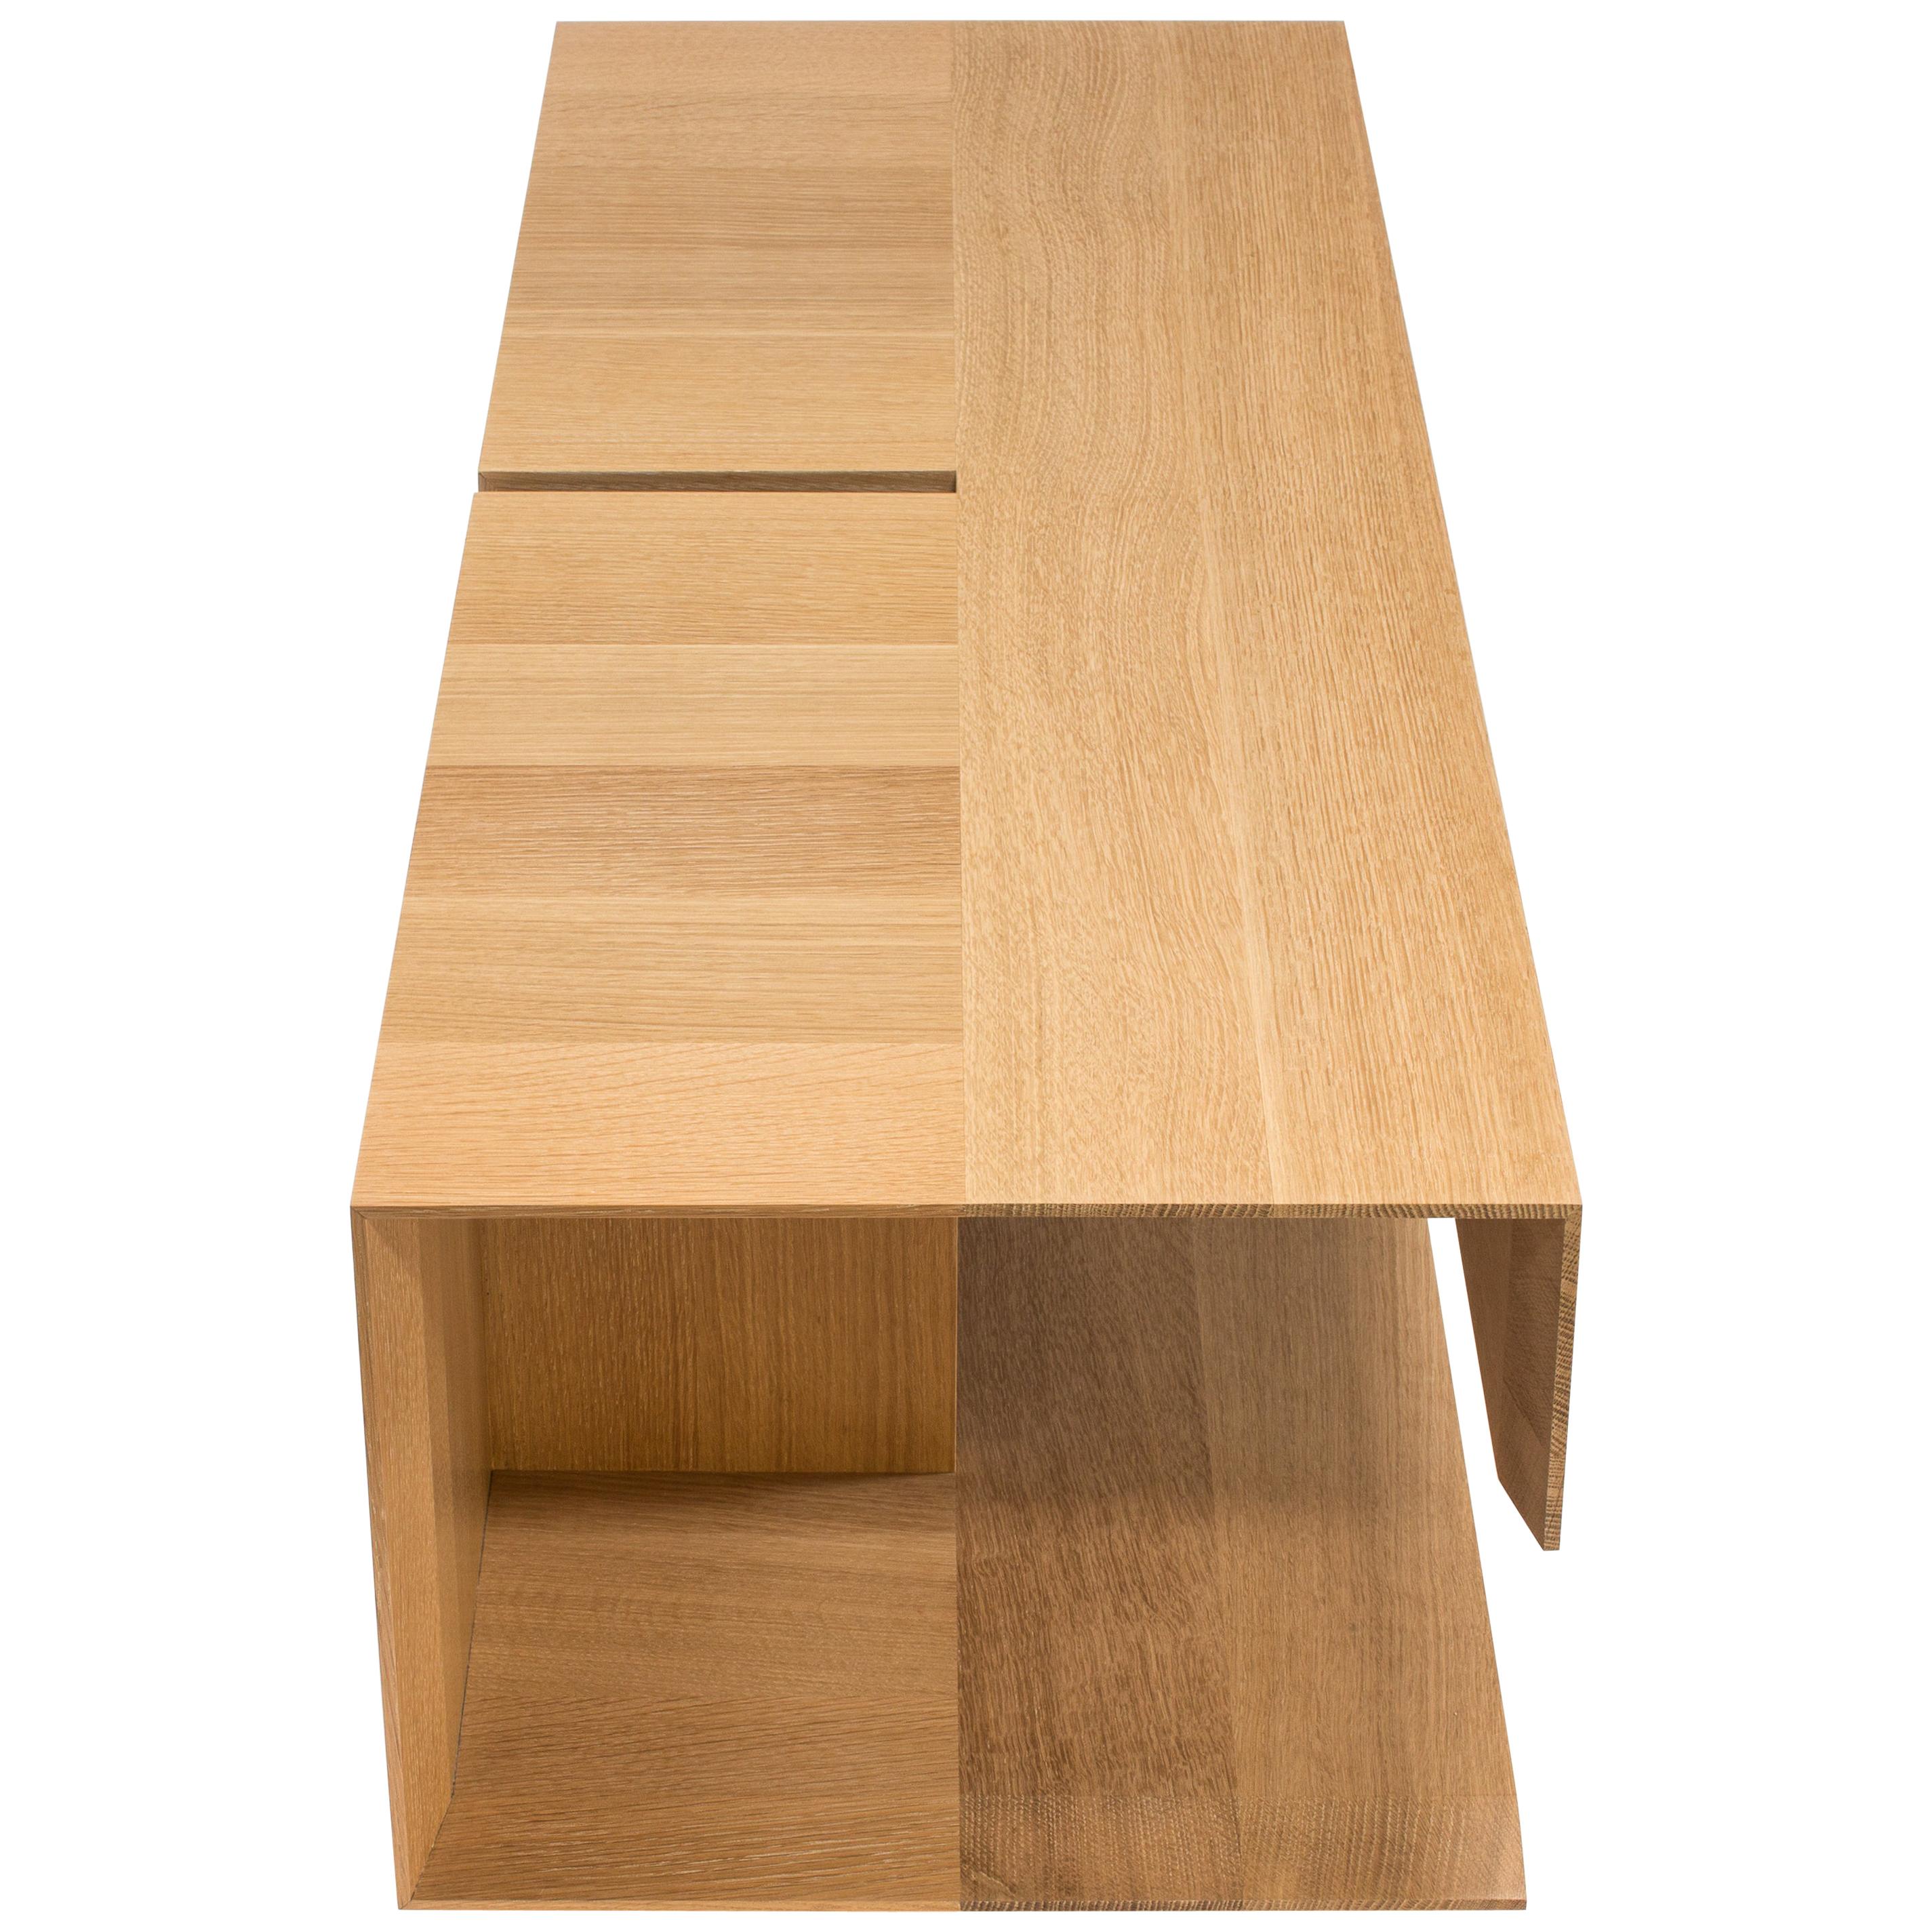 Modern Wood Coffee Table in Tapered White Oak, by Studio DiPaolo